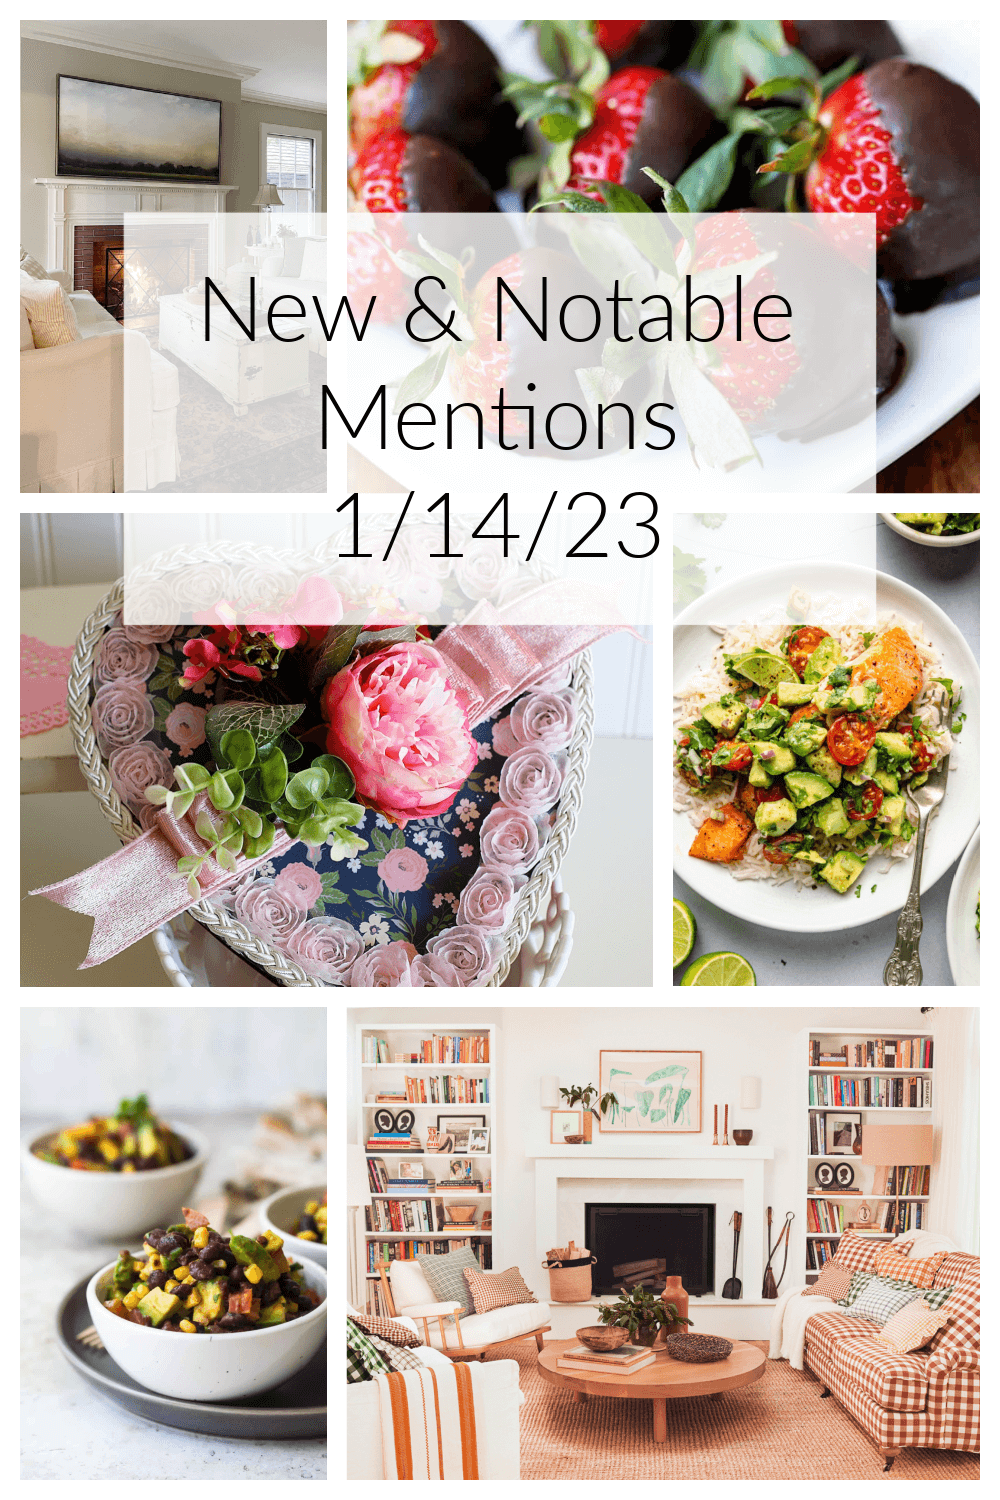 New & Notable Mentions 1/14/23